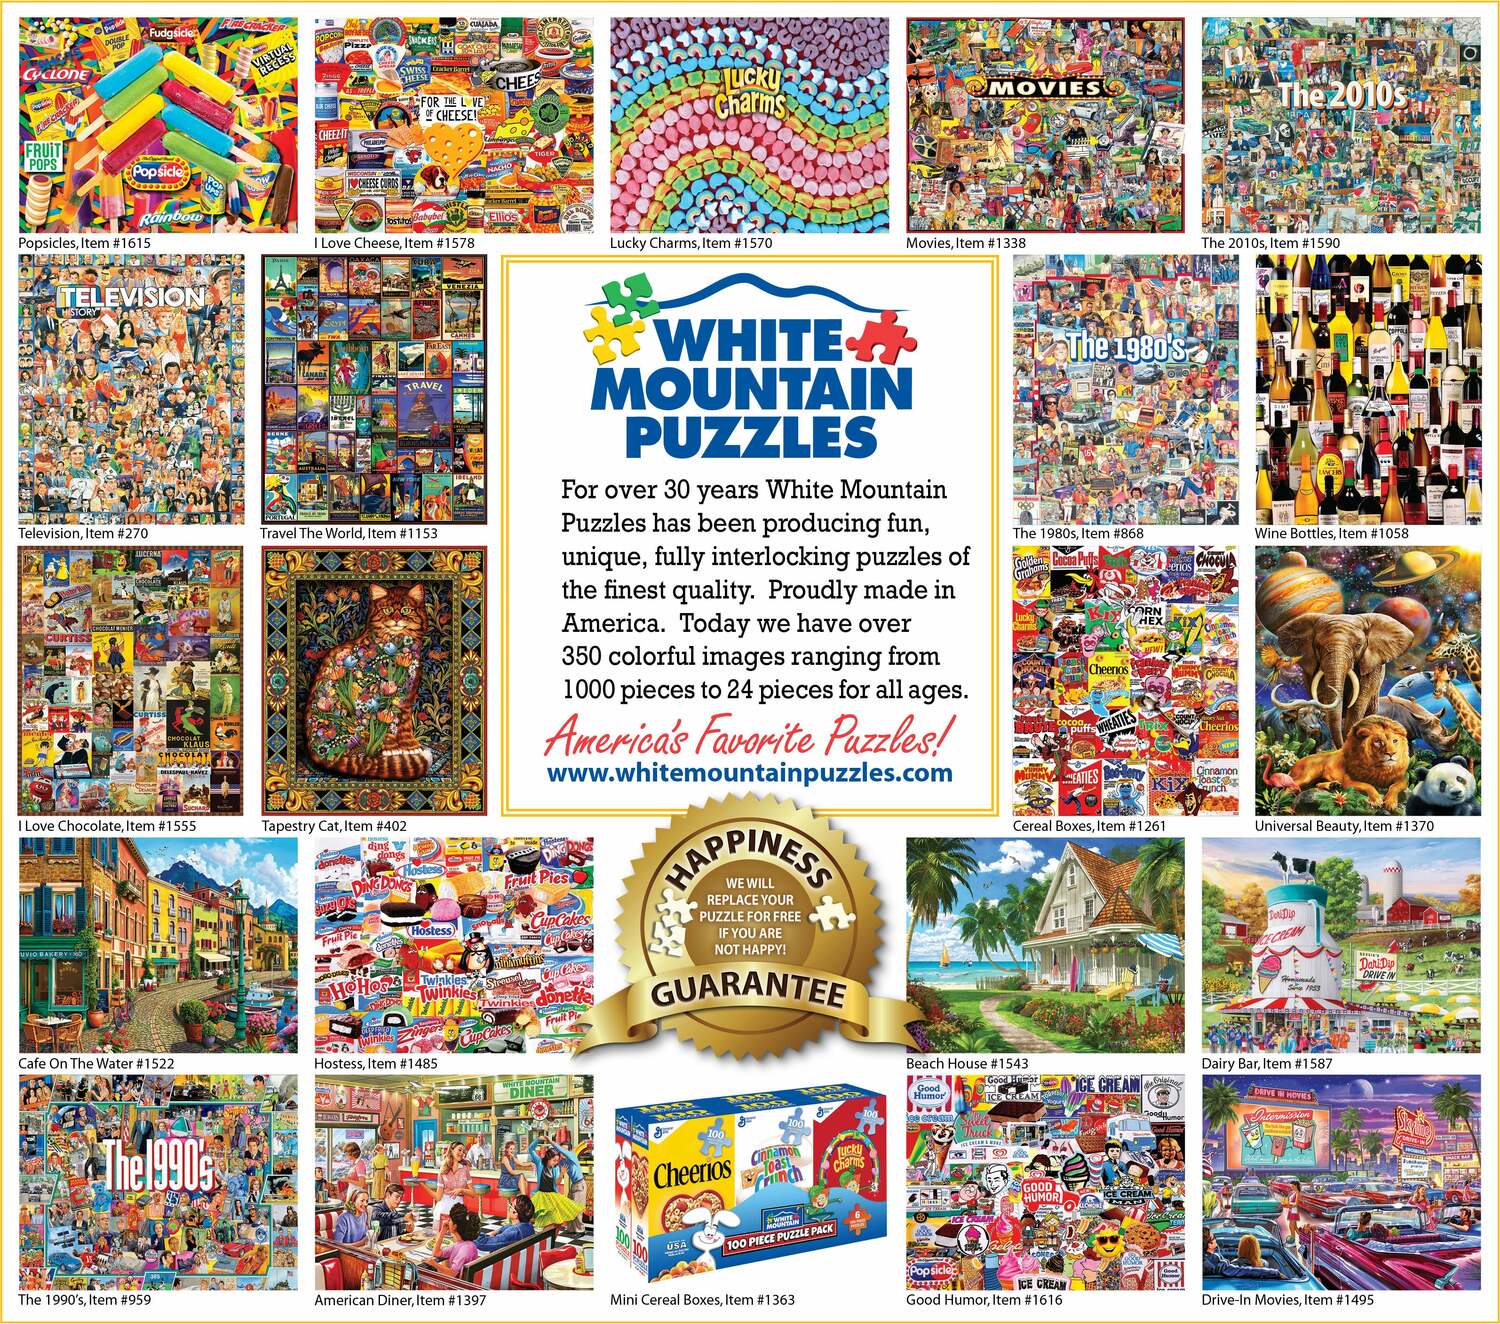 99 Bottles of Beer - 1000 Piece - White Mountain Puzzles